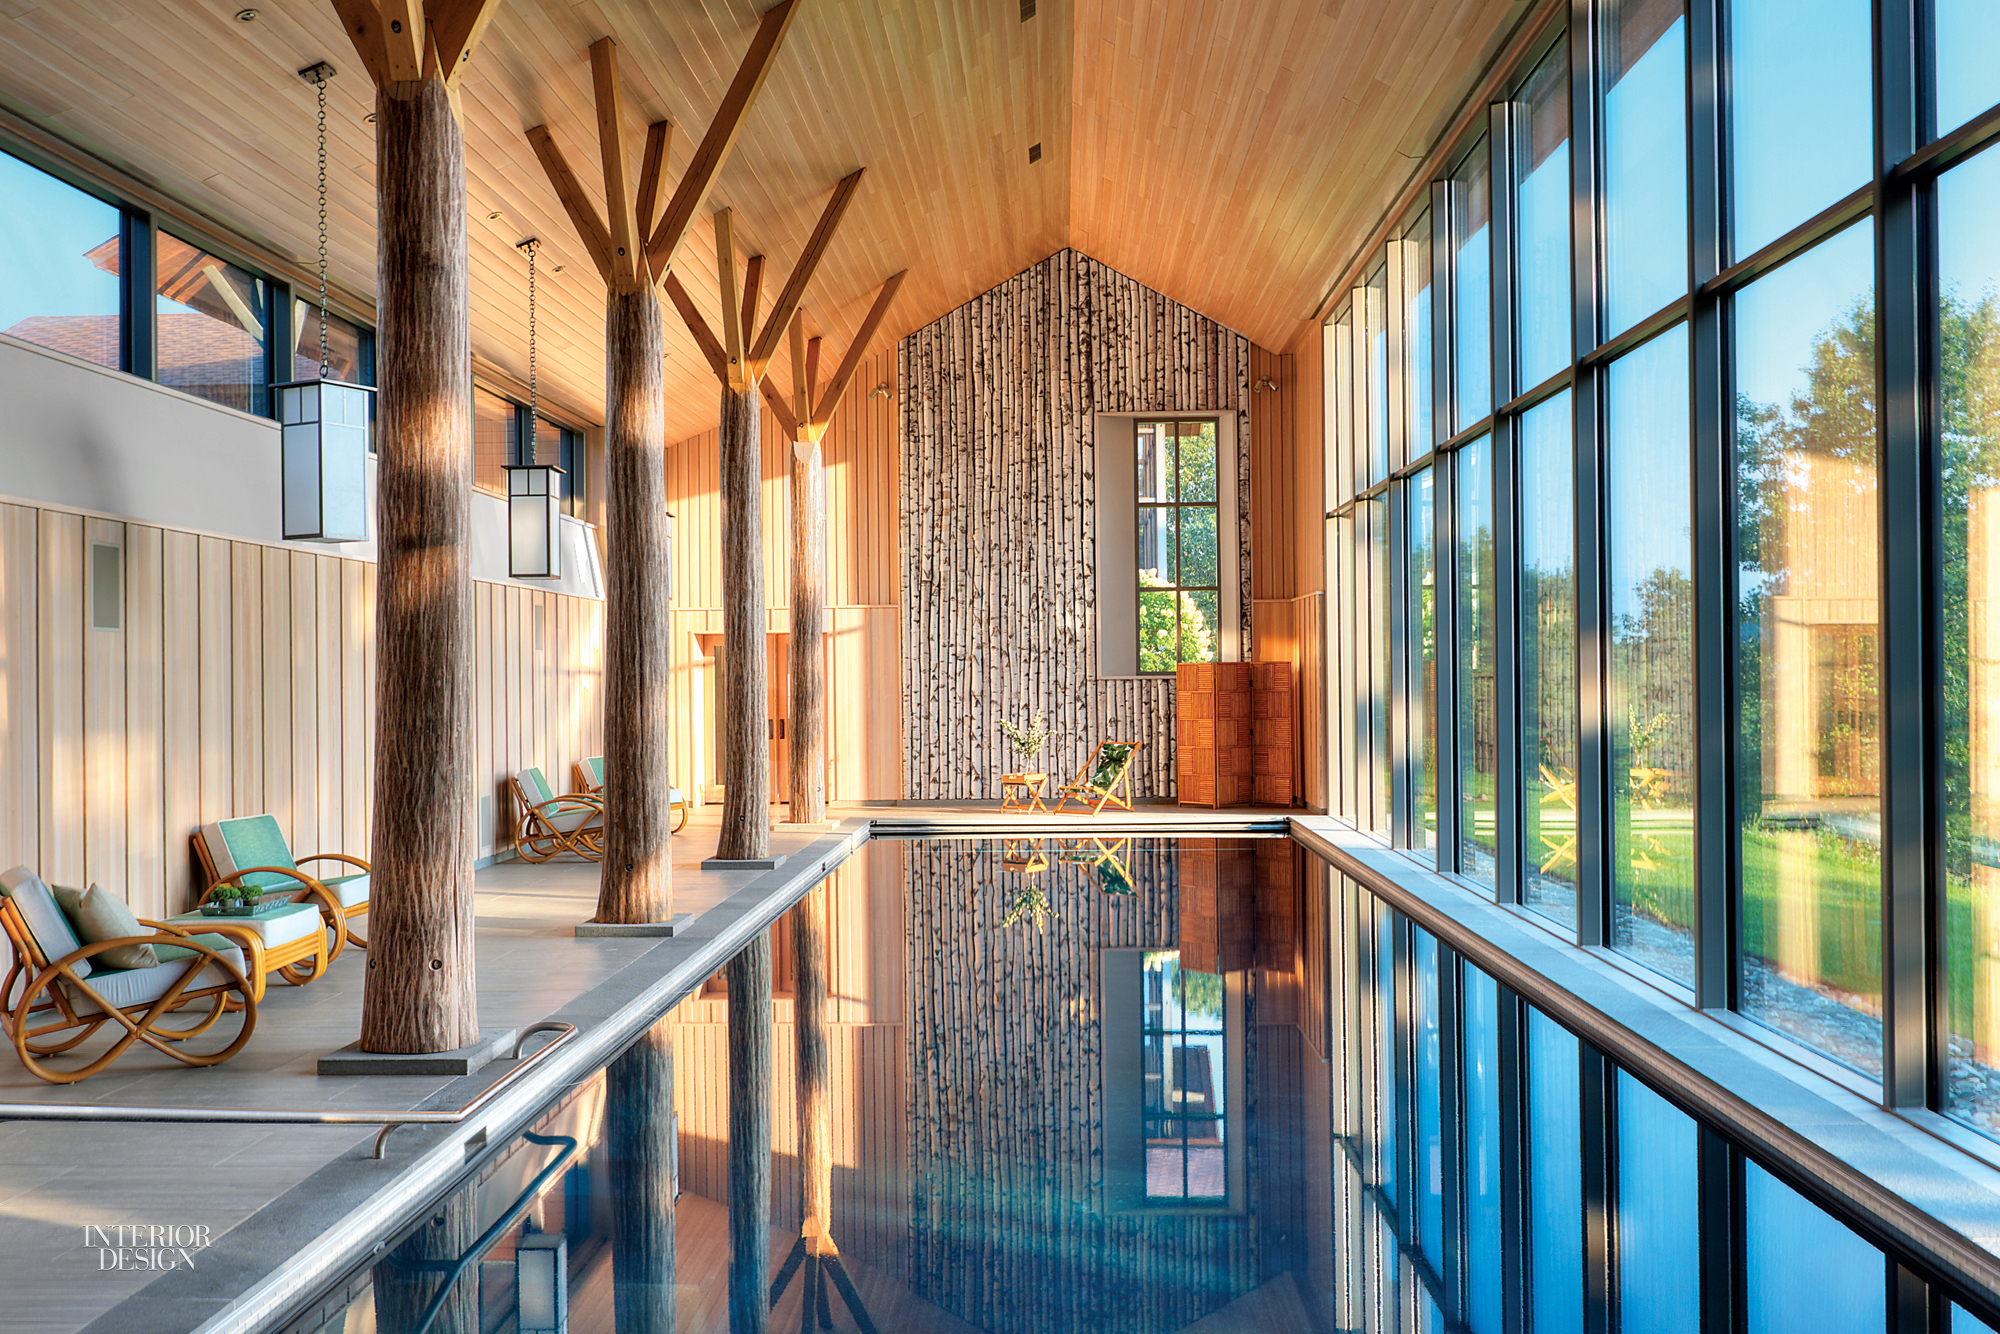 To bring the outdoors in, this cathedral ceiling in an indoor pool house seems to be supported by wooden trees